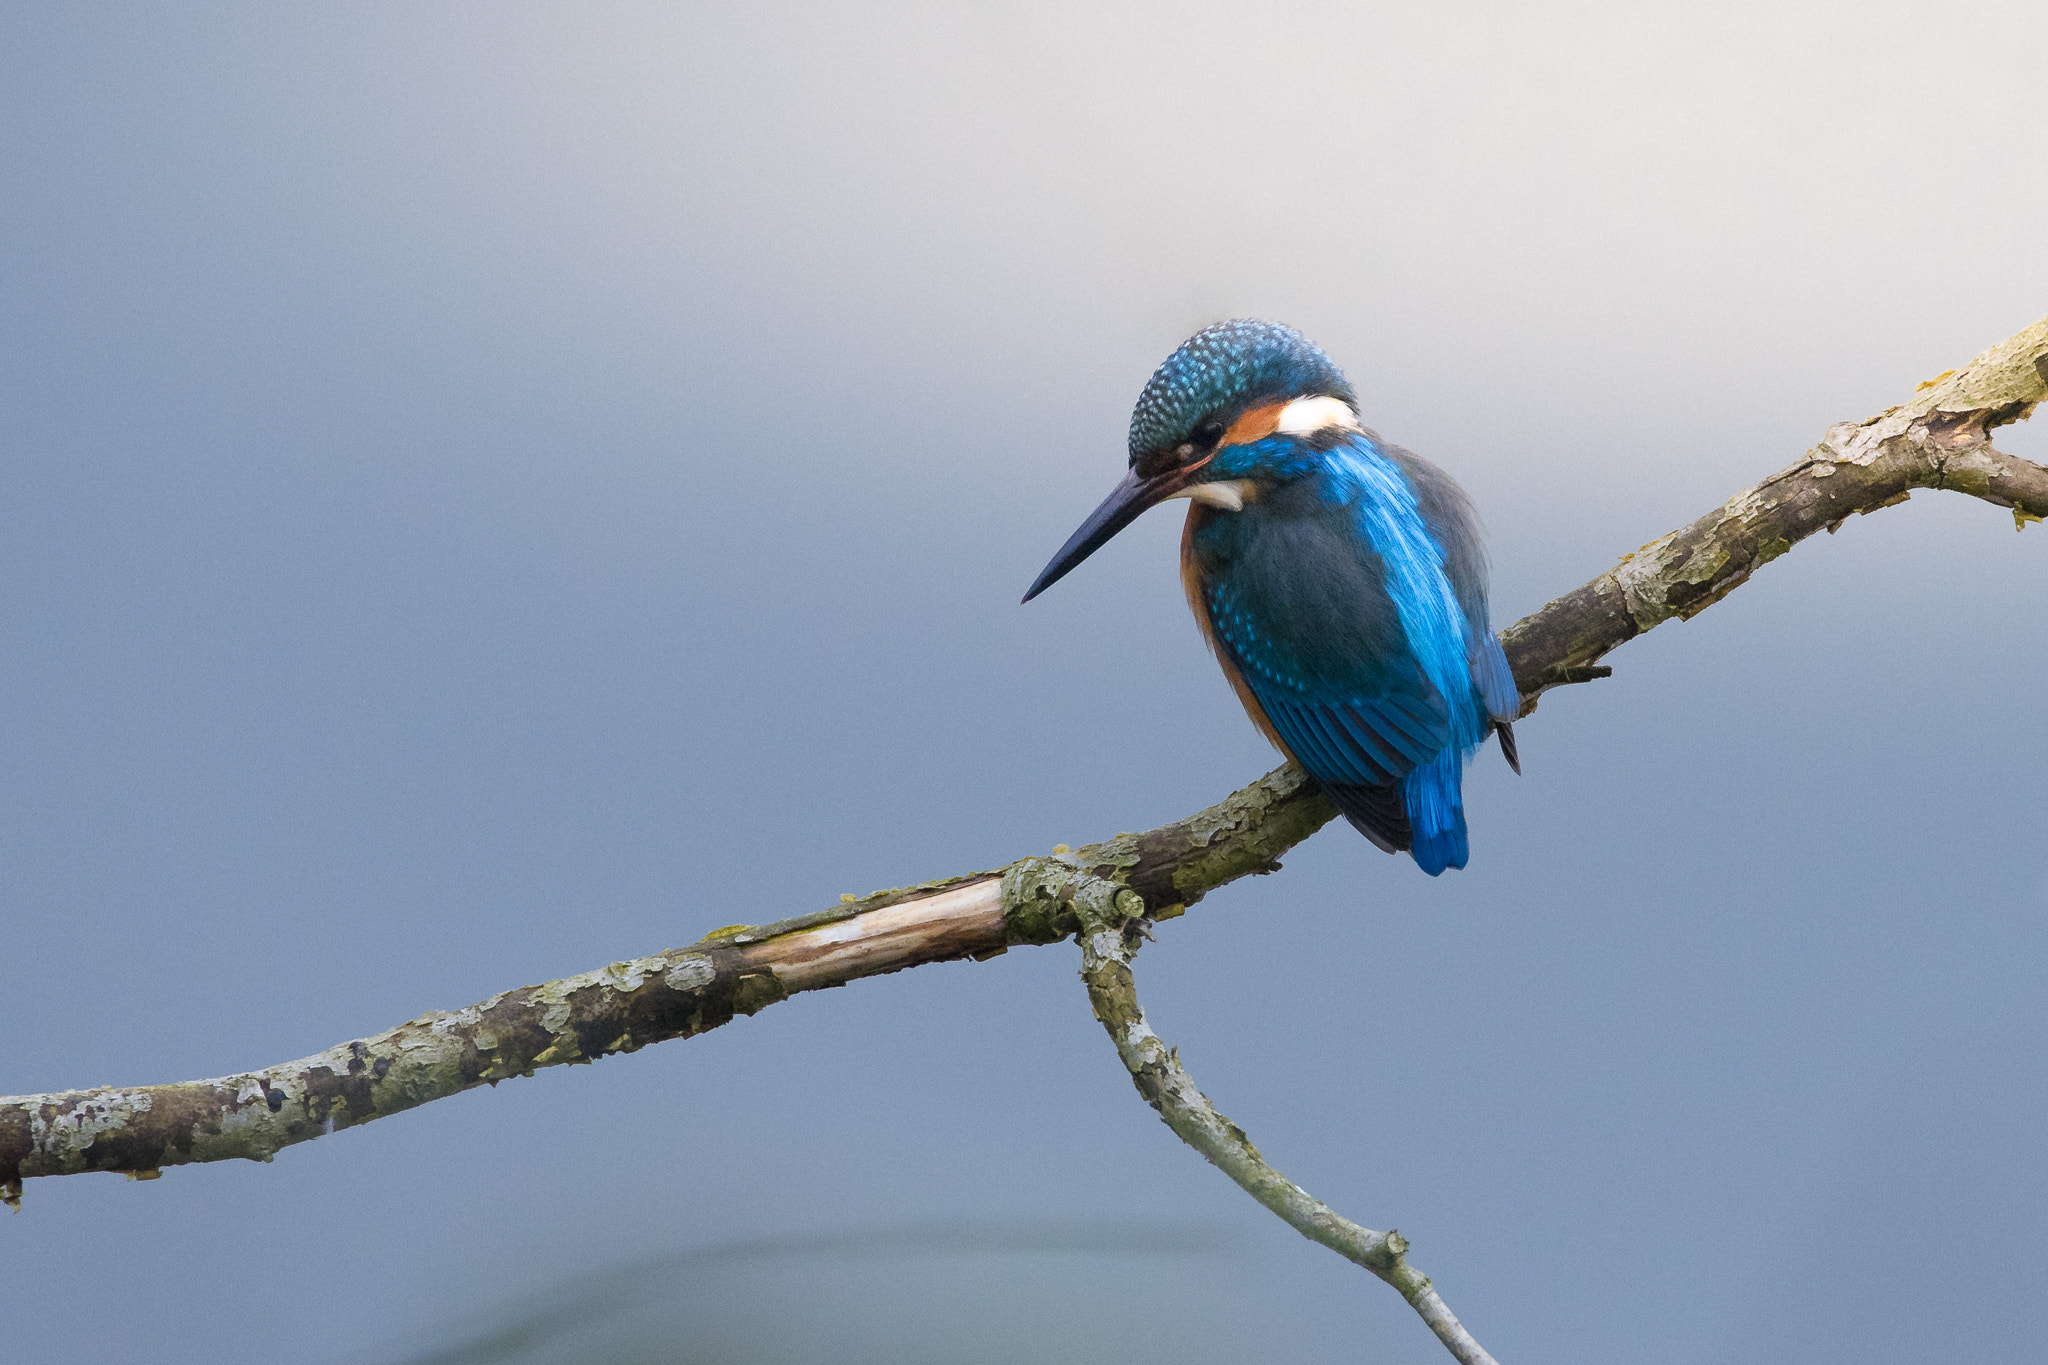 Sony a7 II + Sigma 150-600mm F5-6.3 DG OS HSM | C sample photo. First kingfisher 2016 photography